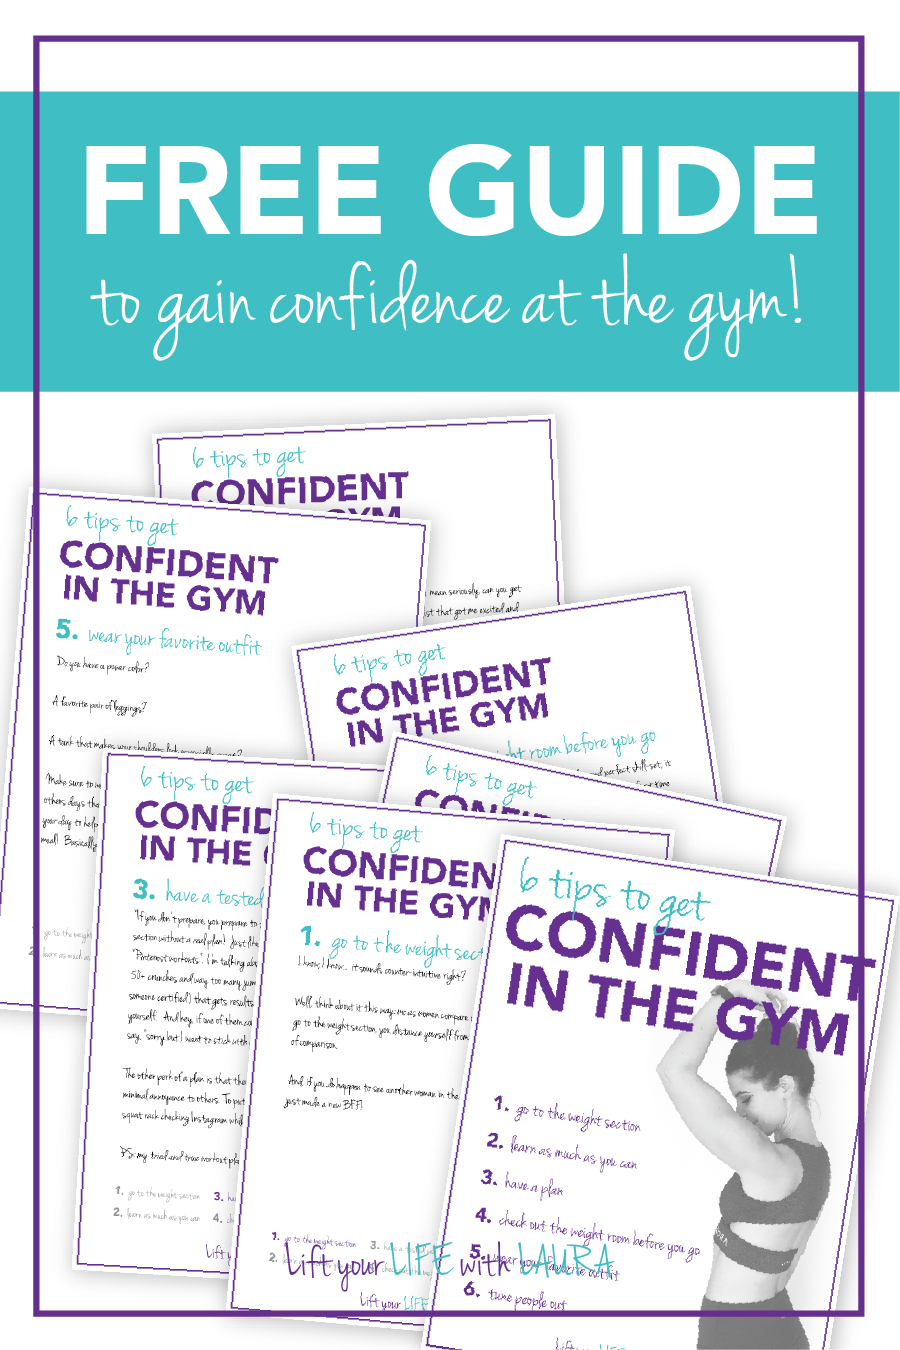 Click for your FREE 7 page guide to gaining confidence at the gym.  You deserve to get over that gym-phobia! Lift your LIFE with LAURA #workouttip